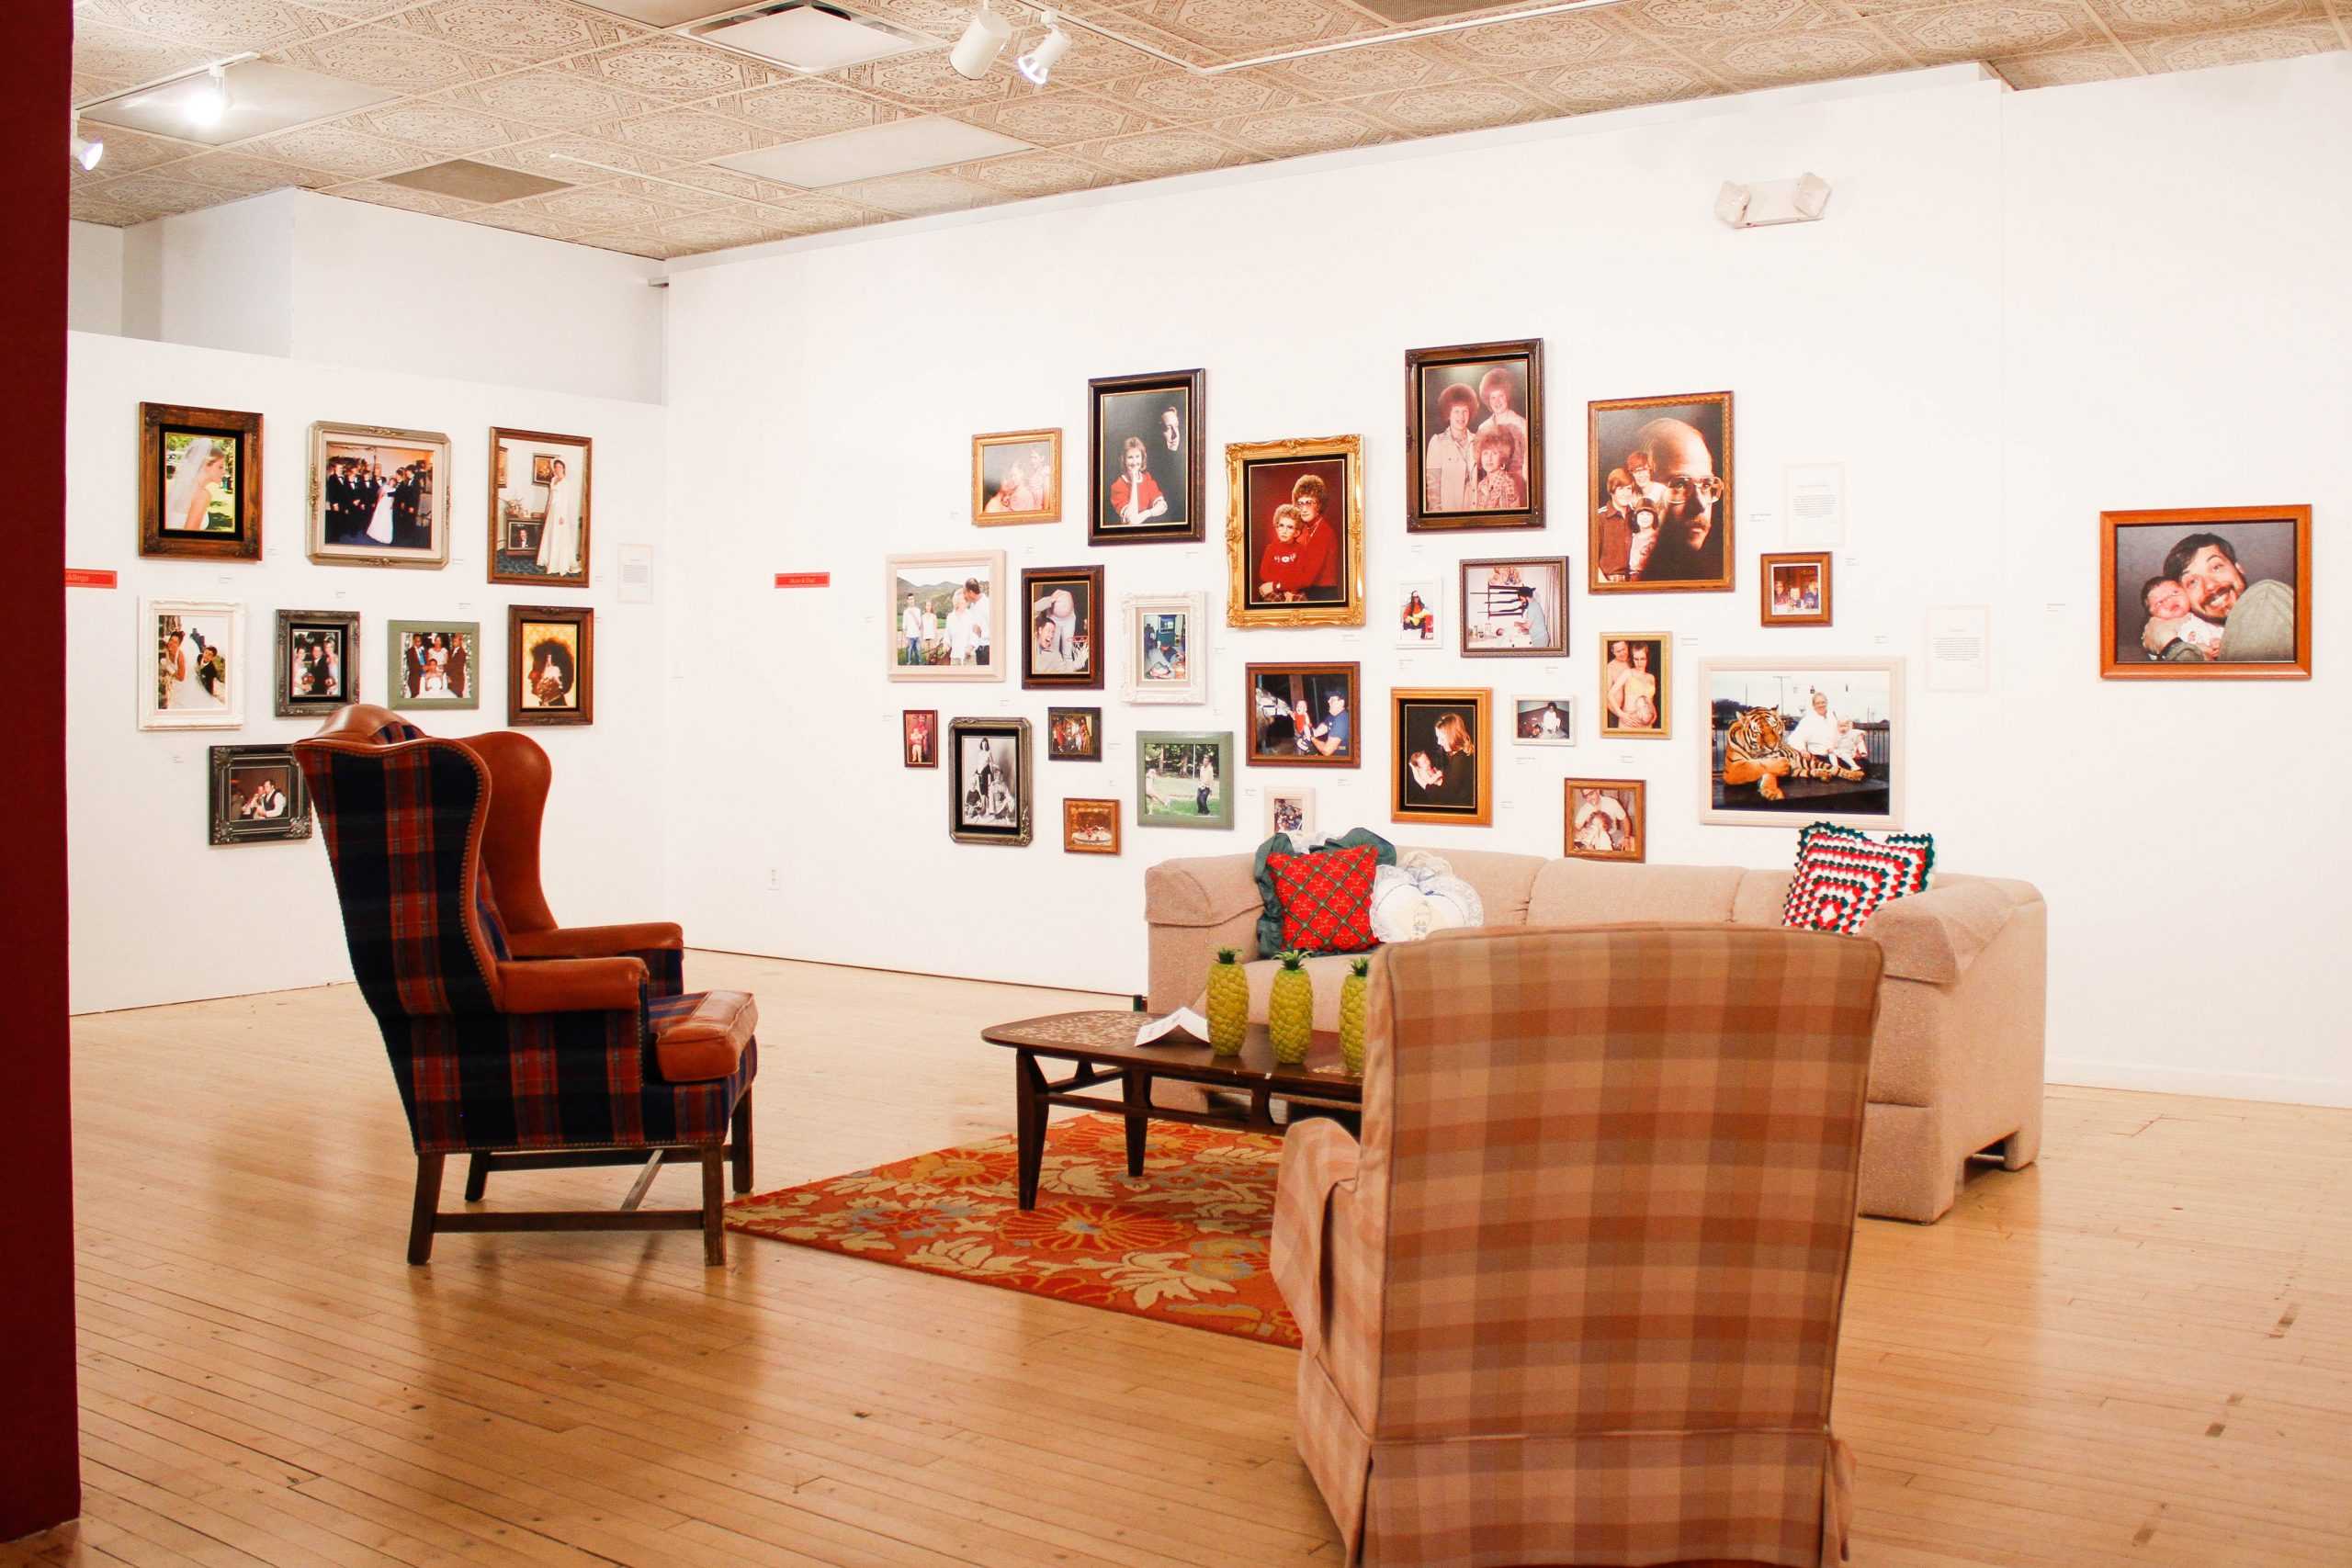 Awkward+Family+Photos+brings+humor+to+Fort+Collins+Art+Museum